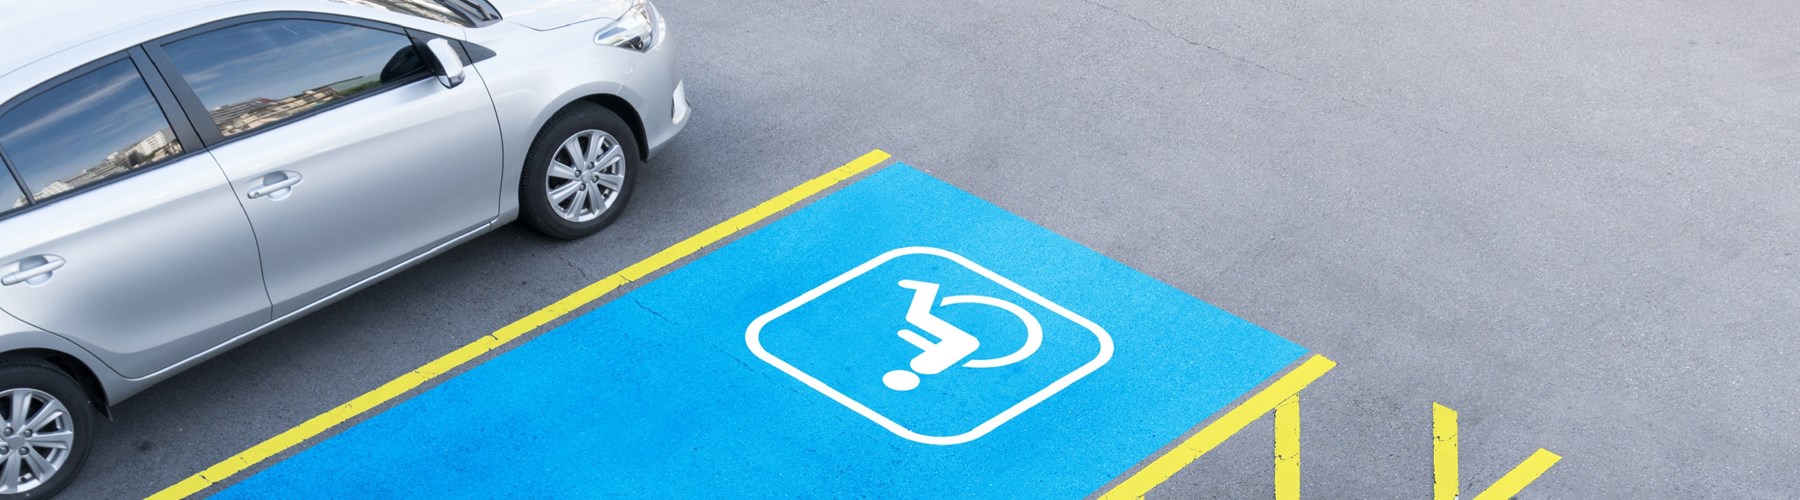 Blue and yellow disabled parking space